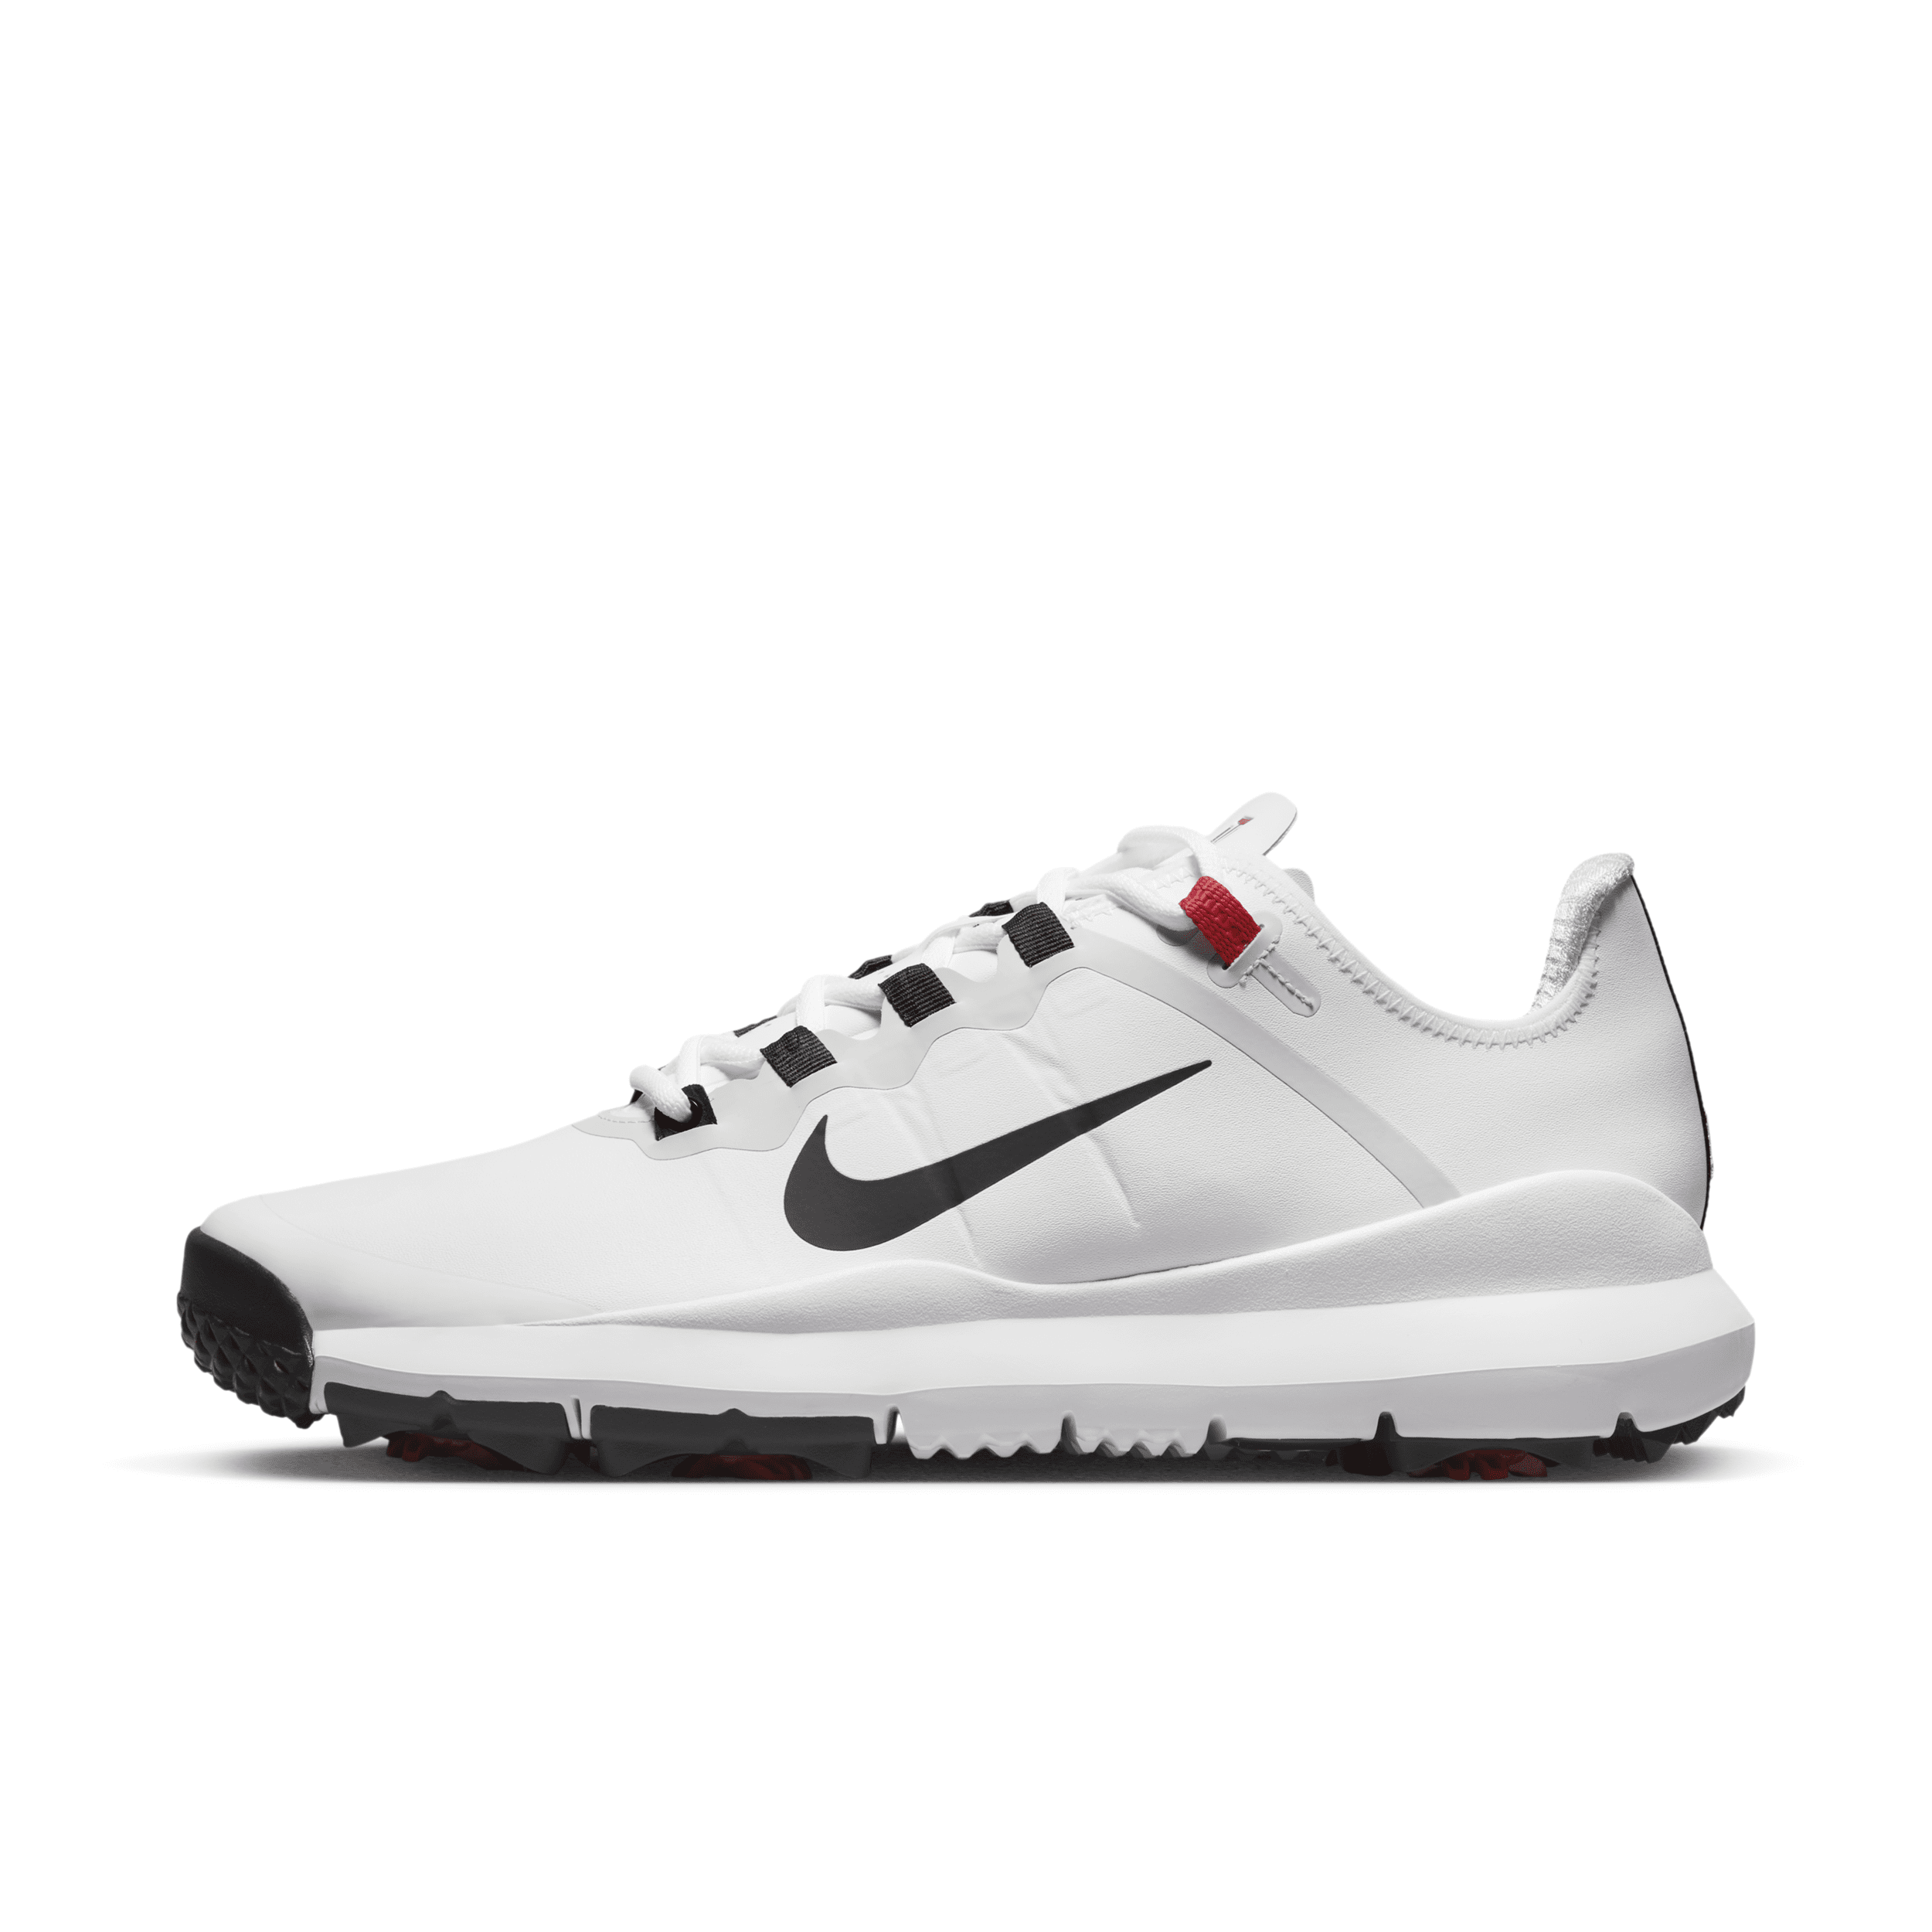 Nike Men's Tiger Woods '13 Golf Shoes In White